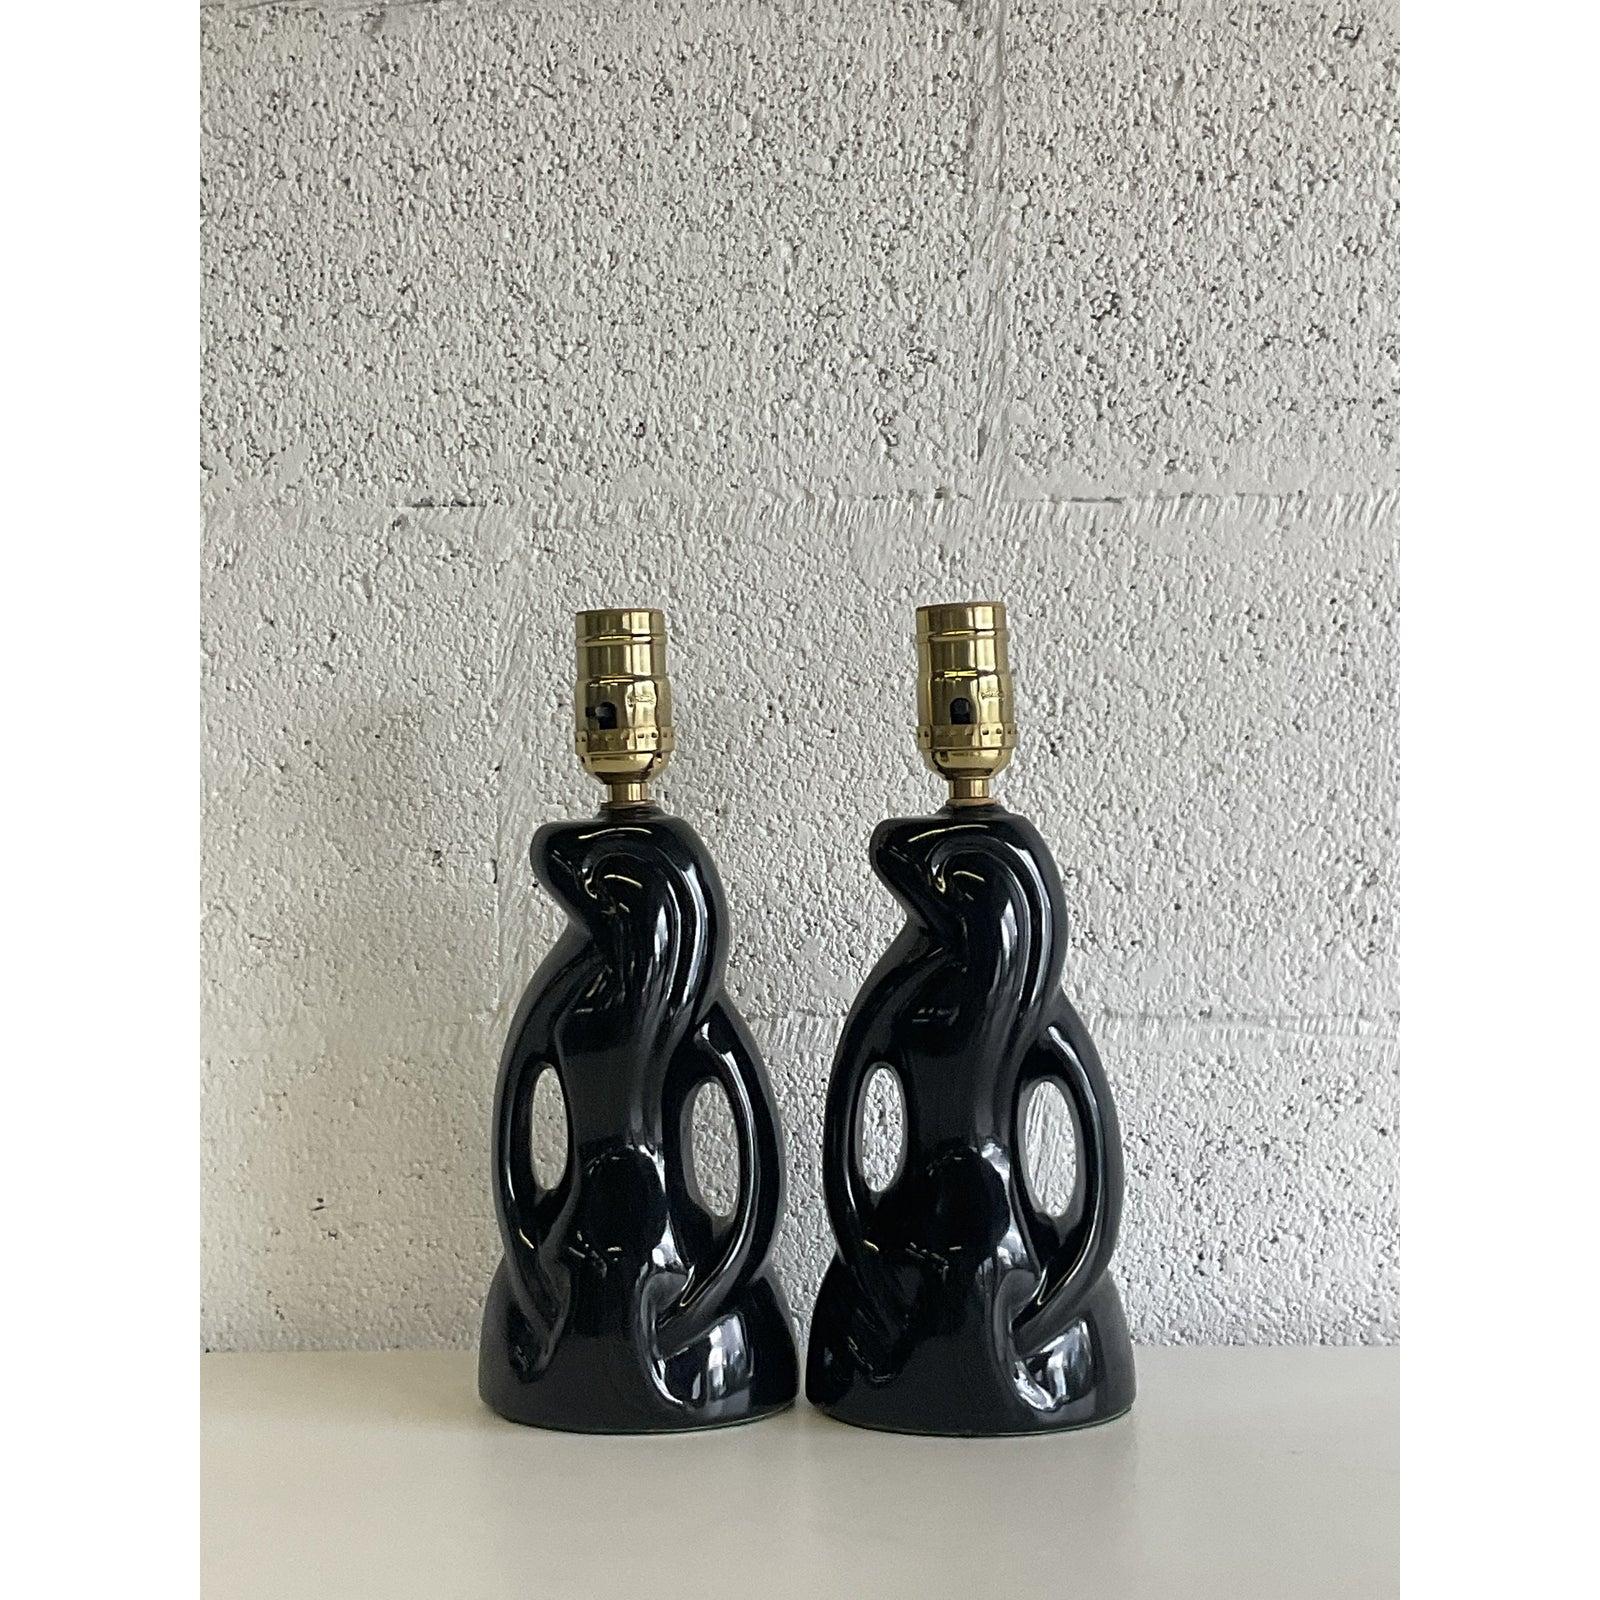 Midcentury Abstract Black Glazed Ceramic Boudoir Lamps - A Pair For Sale 1